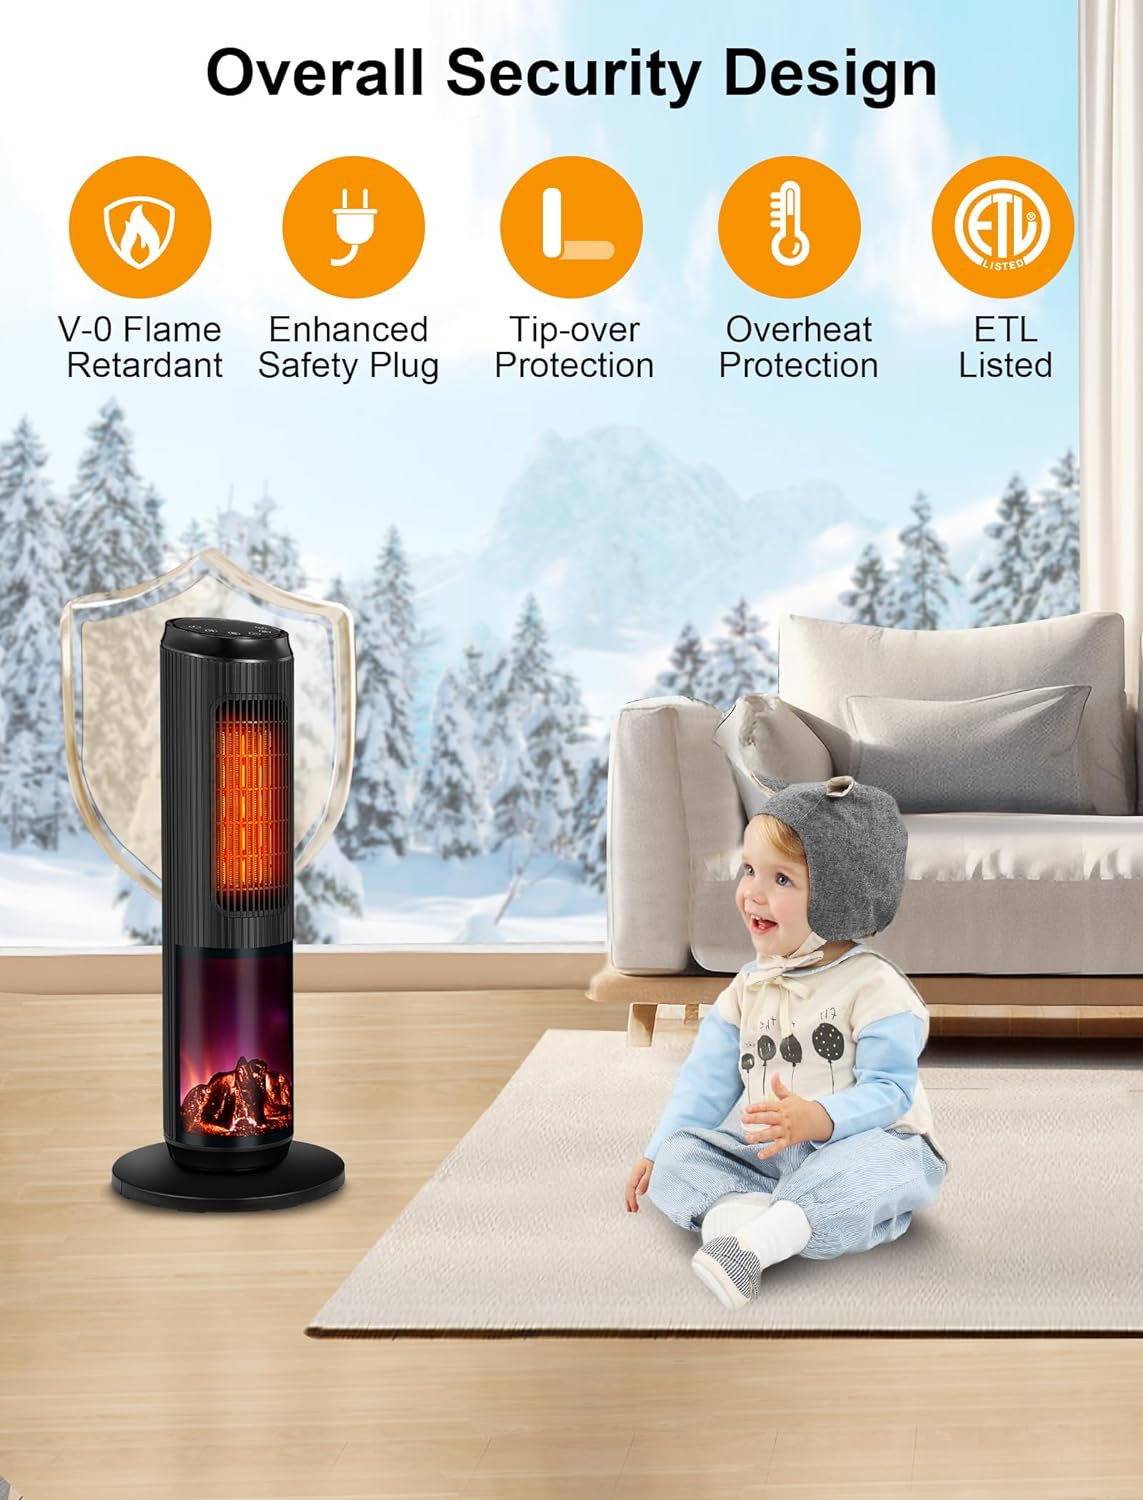 TRUSTECH 25" 1500W Portable electric Tower Heater with Remote